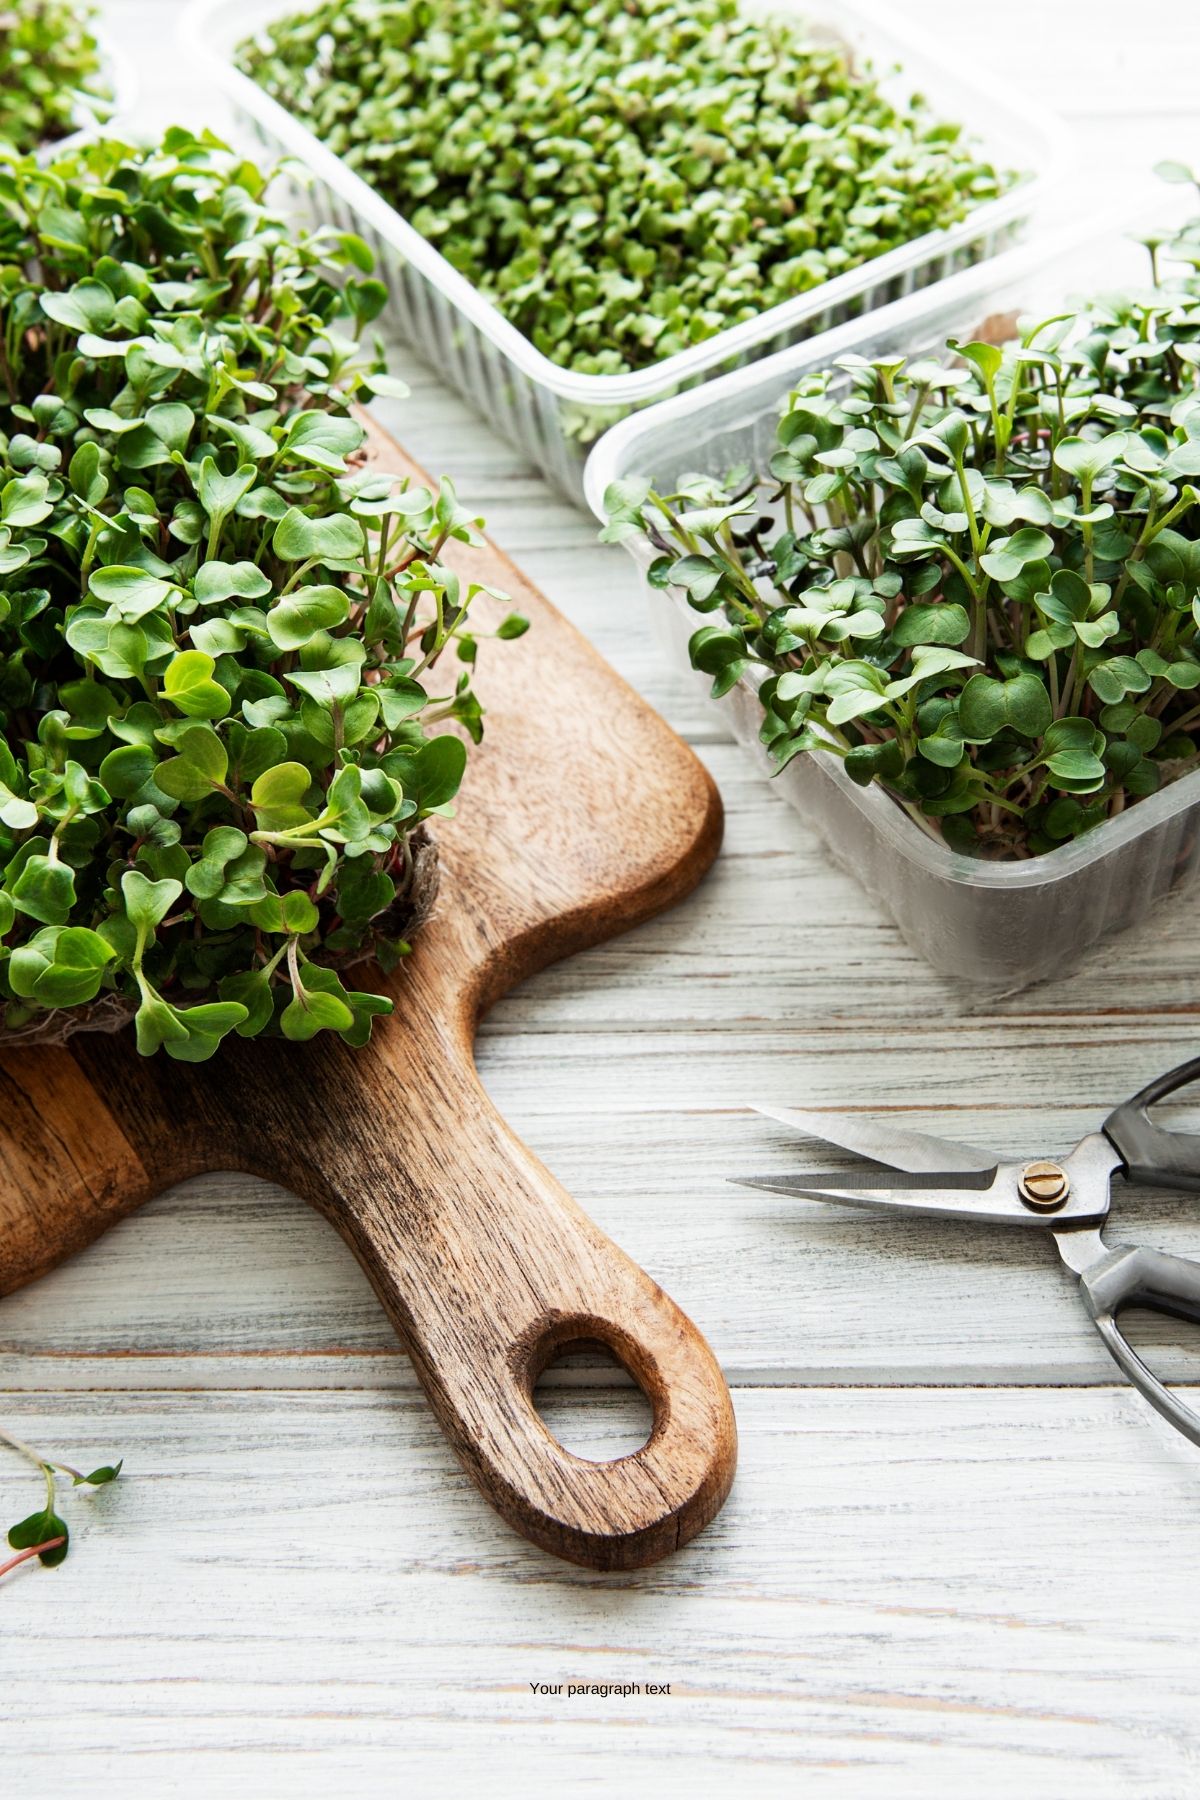 Trays of radish microgreens on a table with scissors.